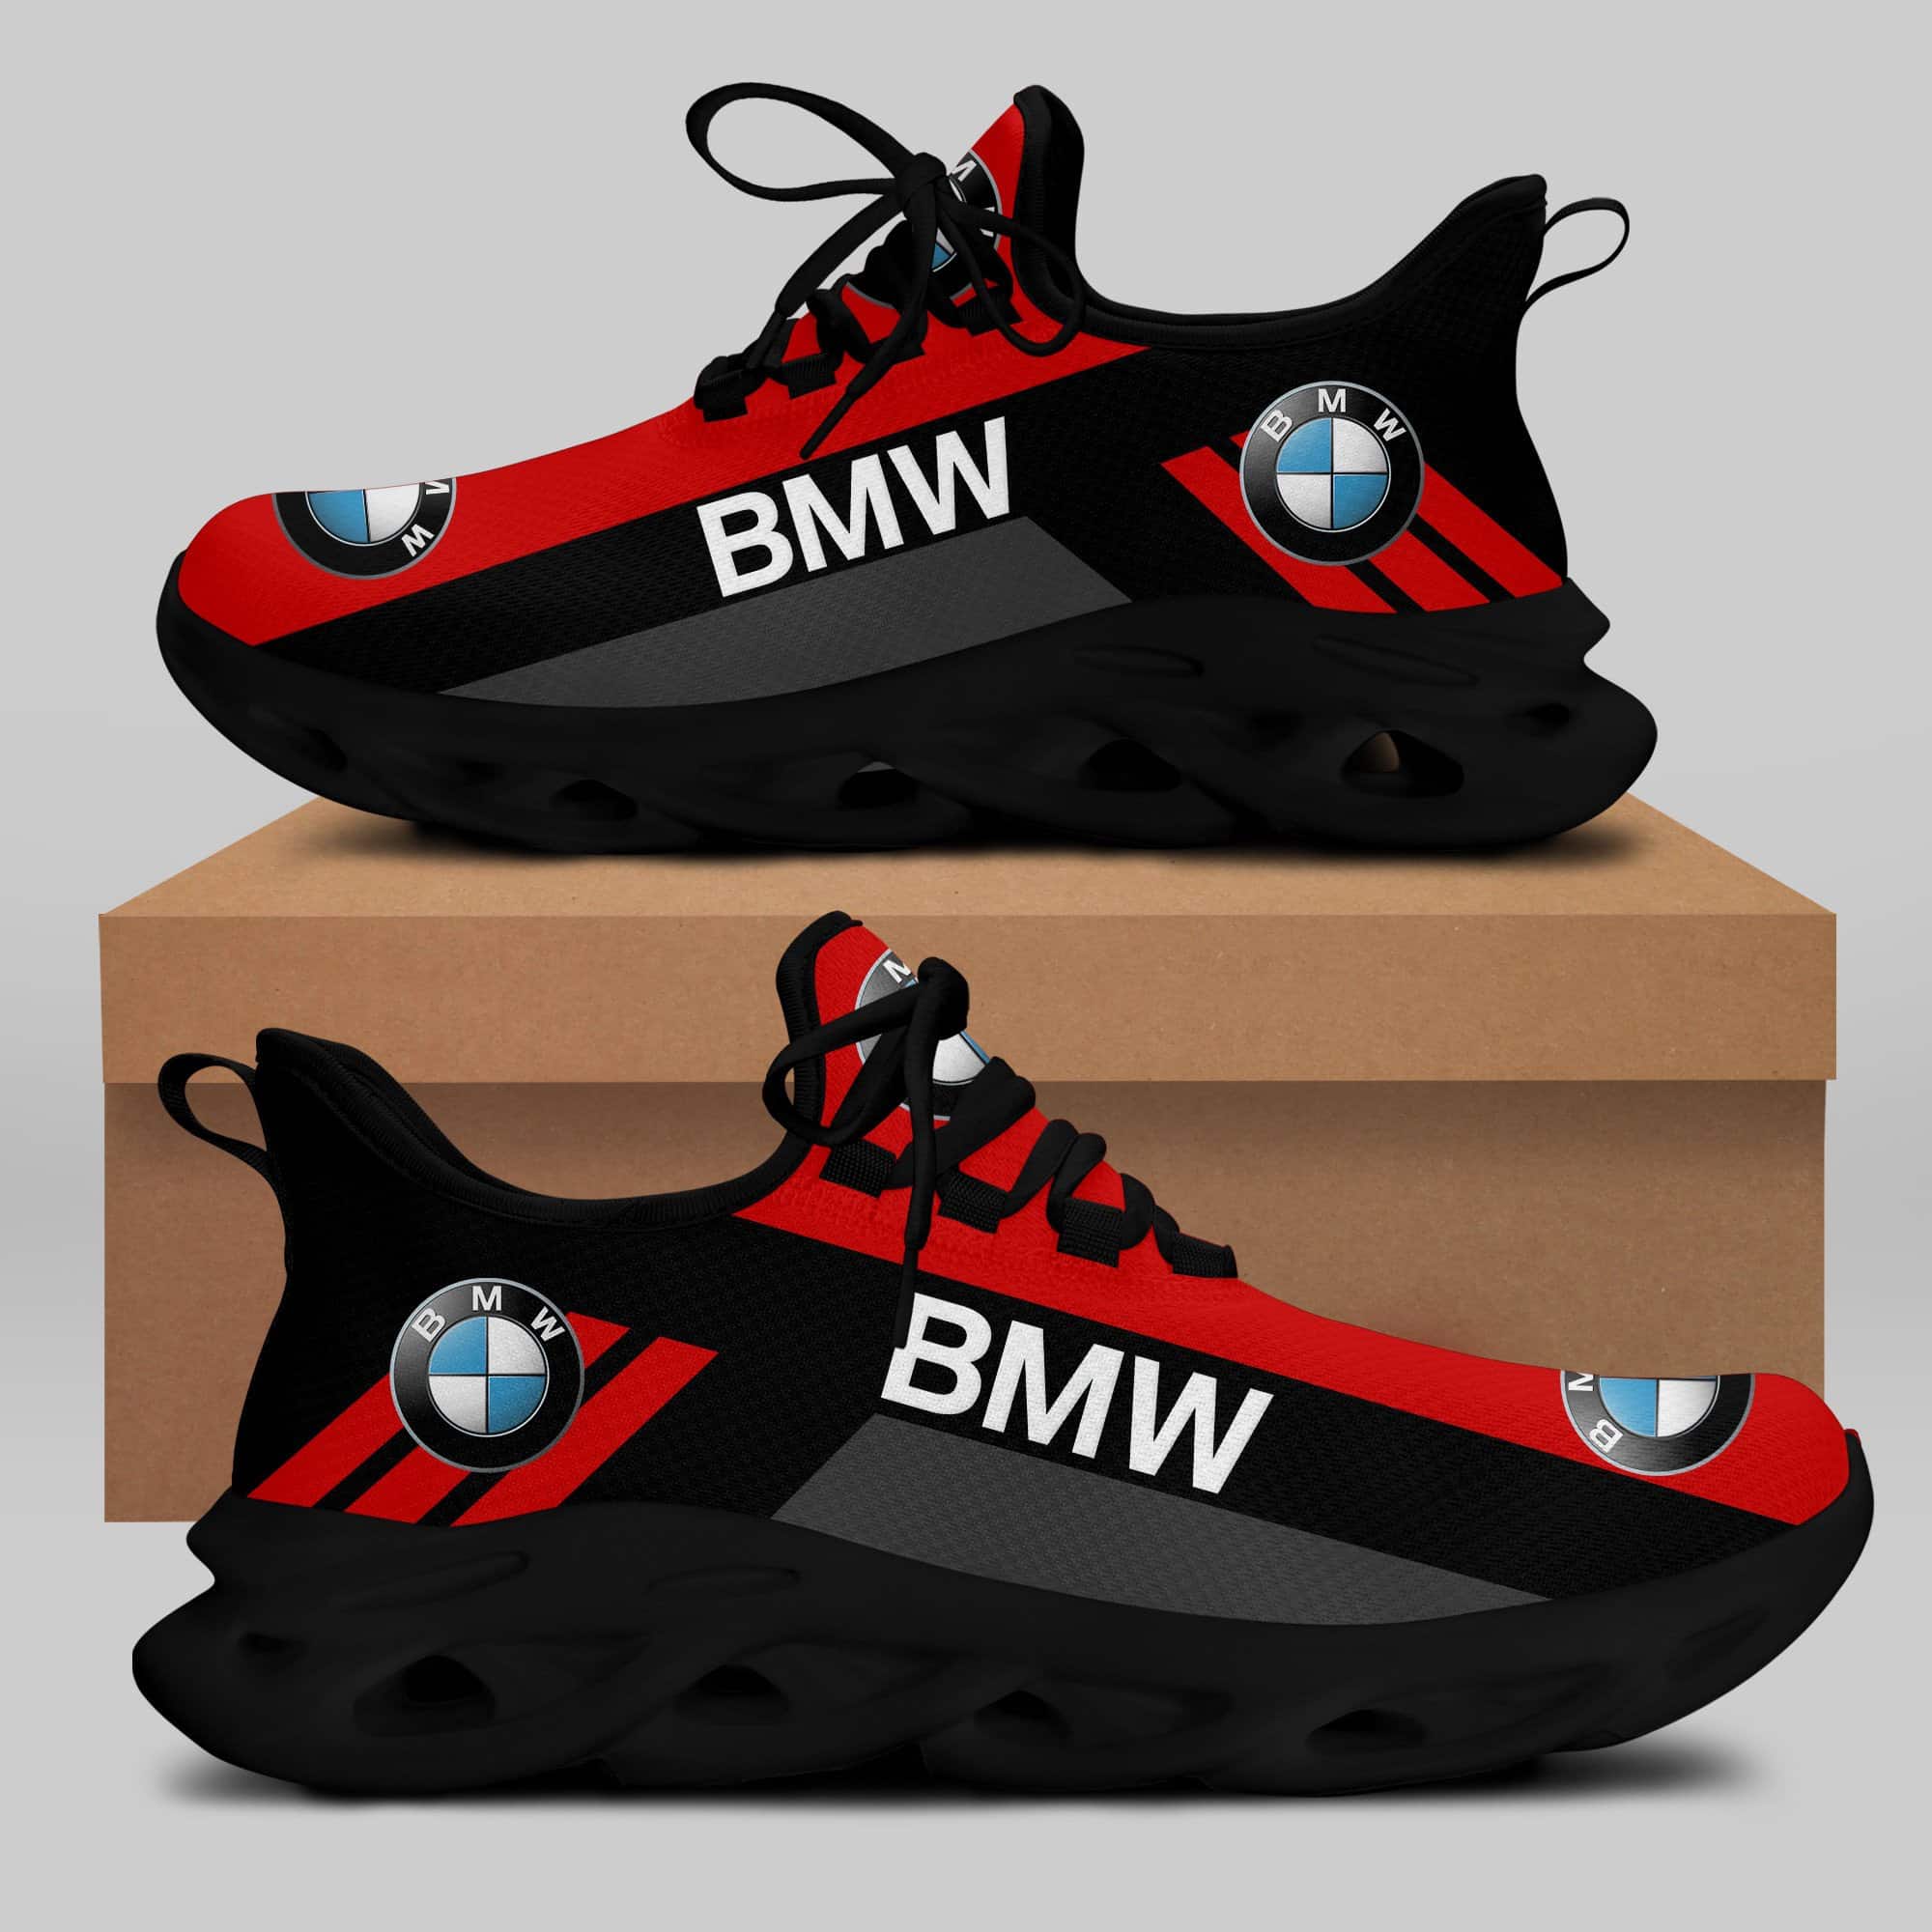 Bmw Running Shoes Max Soul Shoes Sneakers Ver 19 1